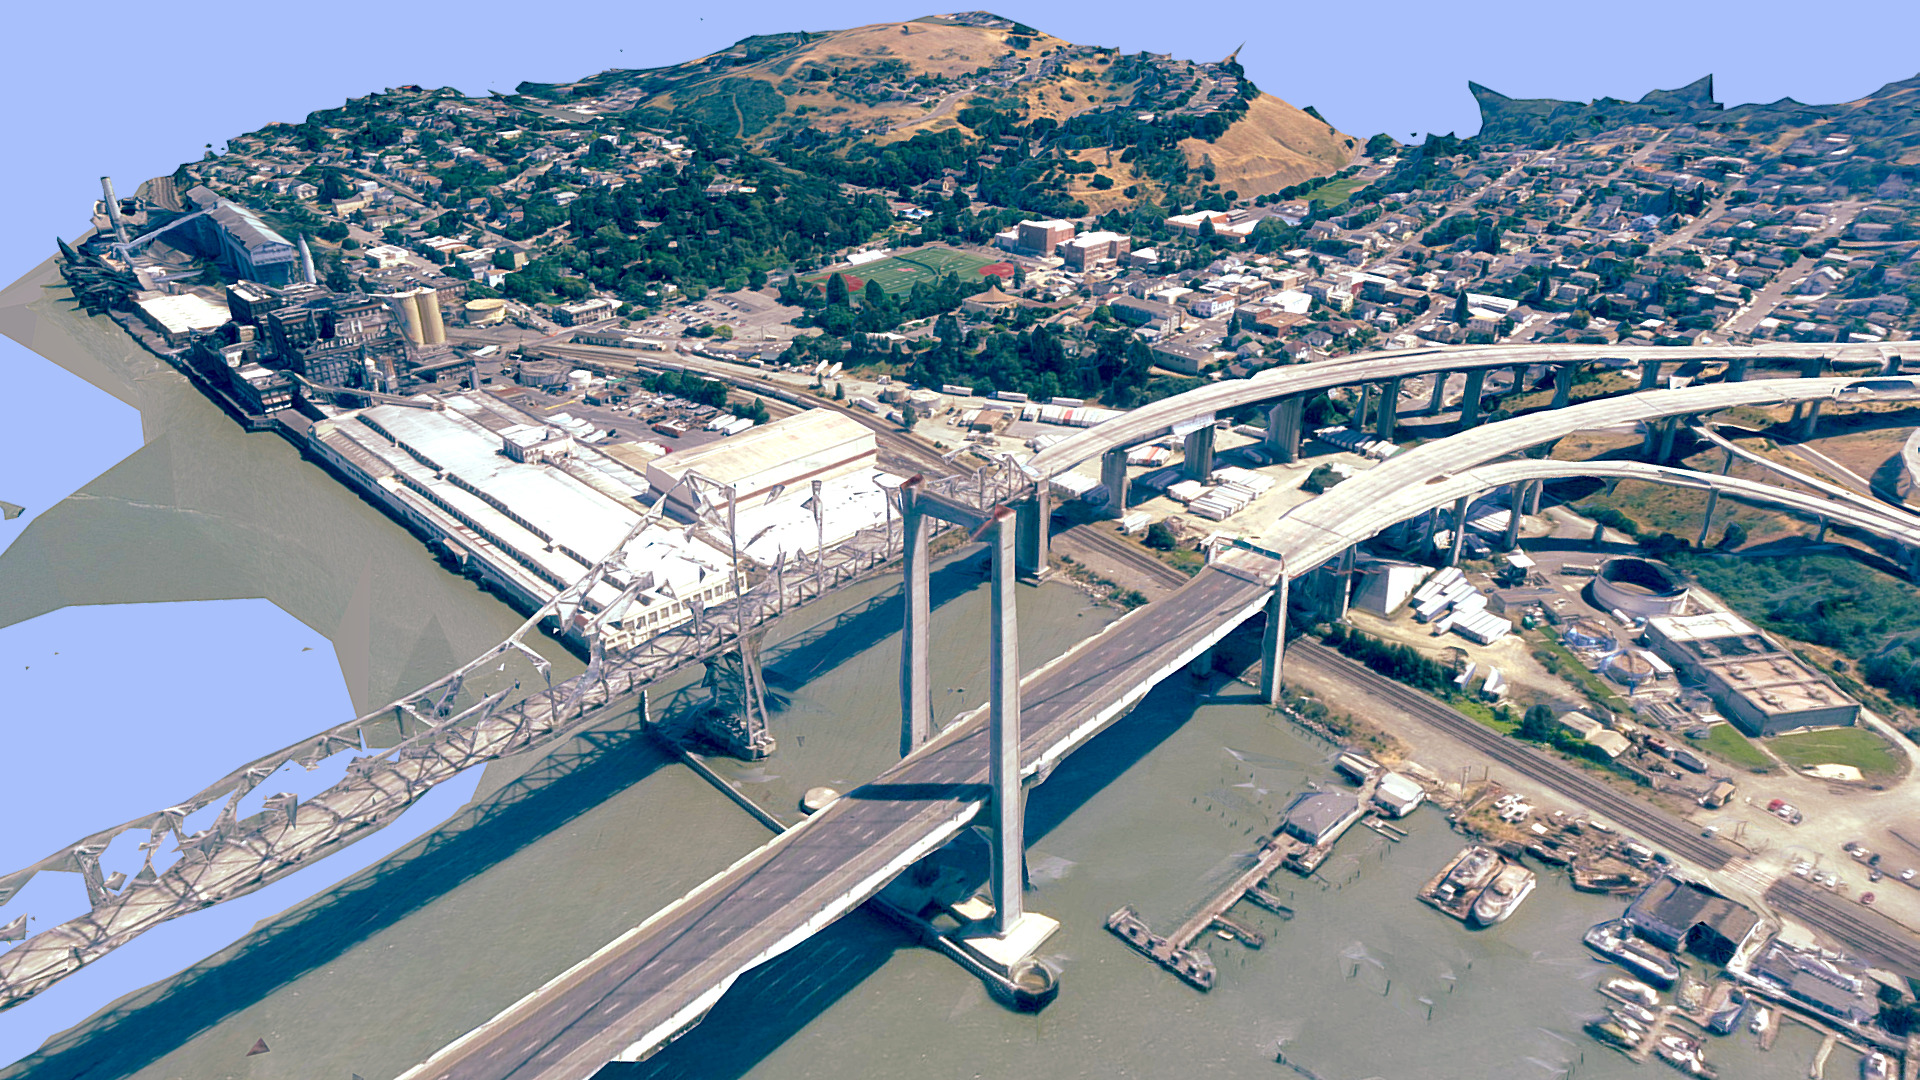 3D model Martinez California Bridge in 2013 - This is a 3D model of the Martinez California Bridge in 2013. The 3D model is about a high angle view of a bridge.